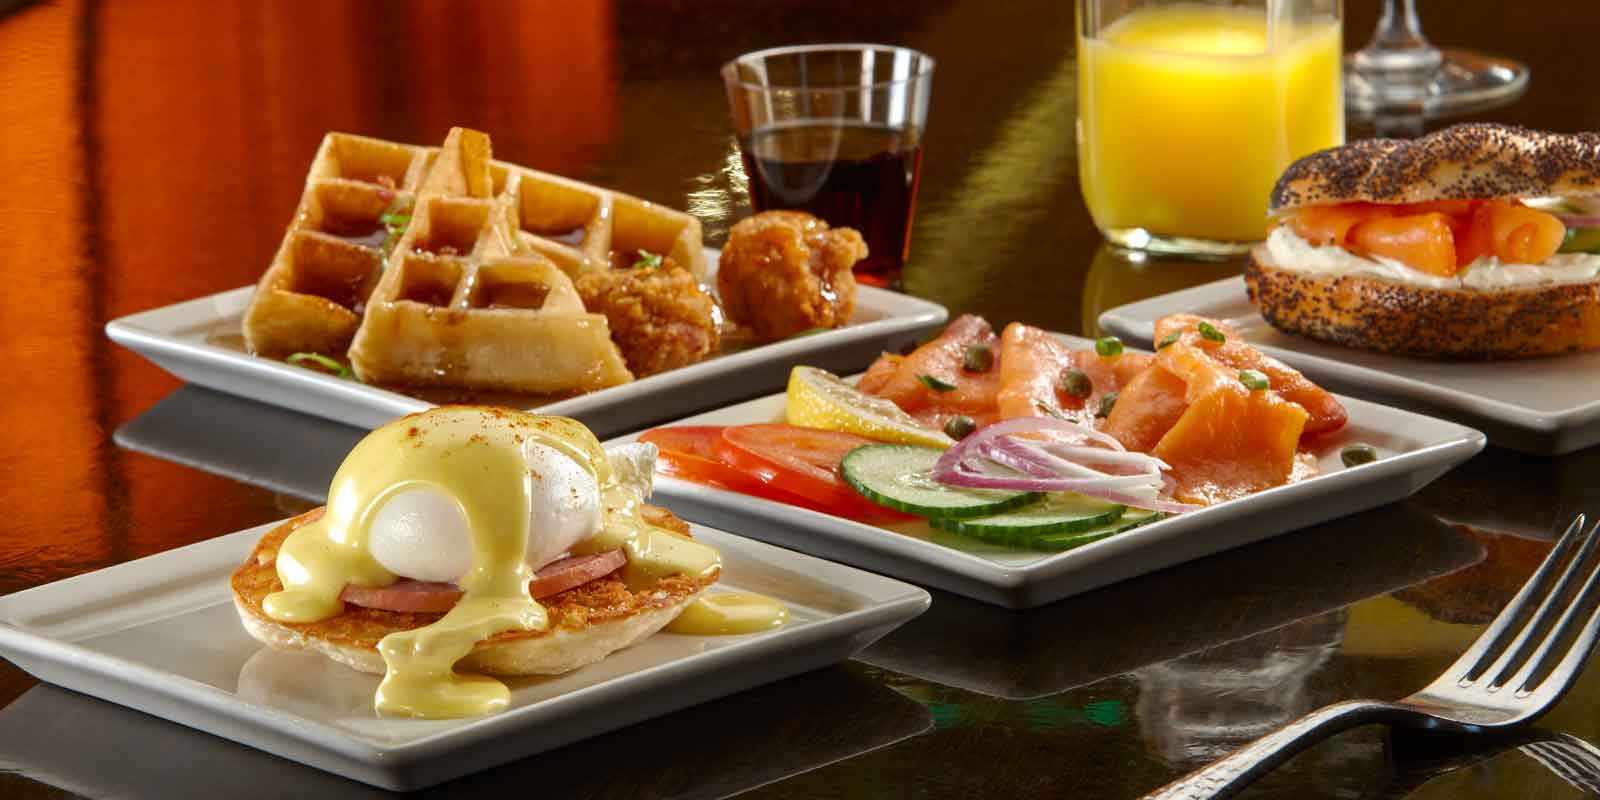 Photo of a spread of breakfast foods, like eggs benedict, waffles, and a bagel with lox.